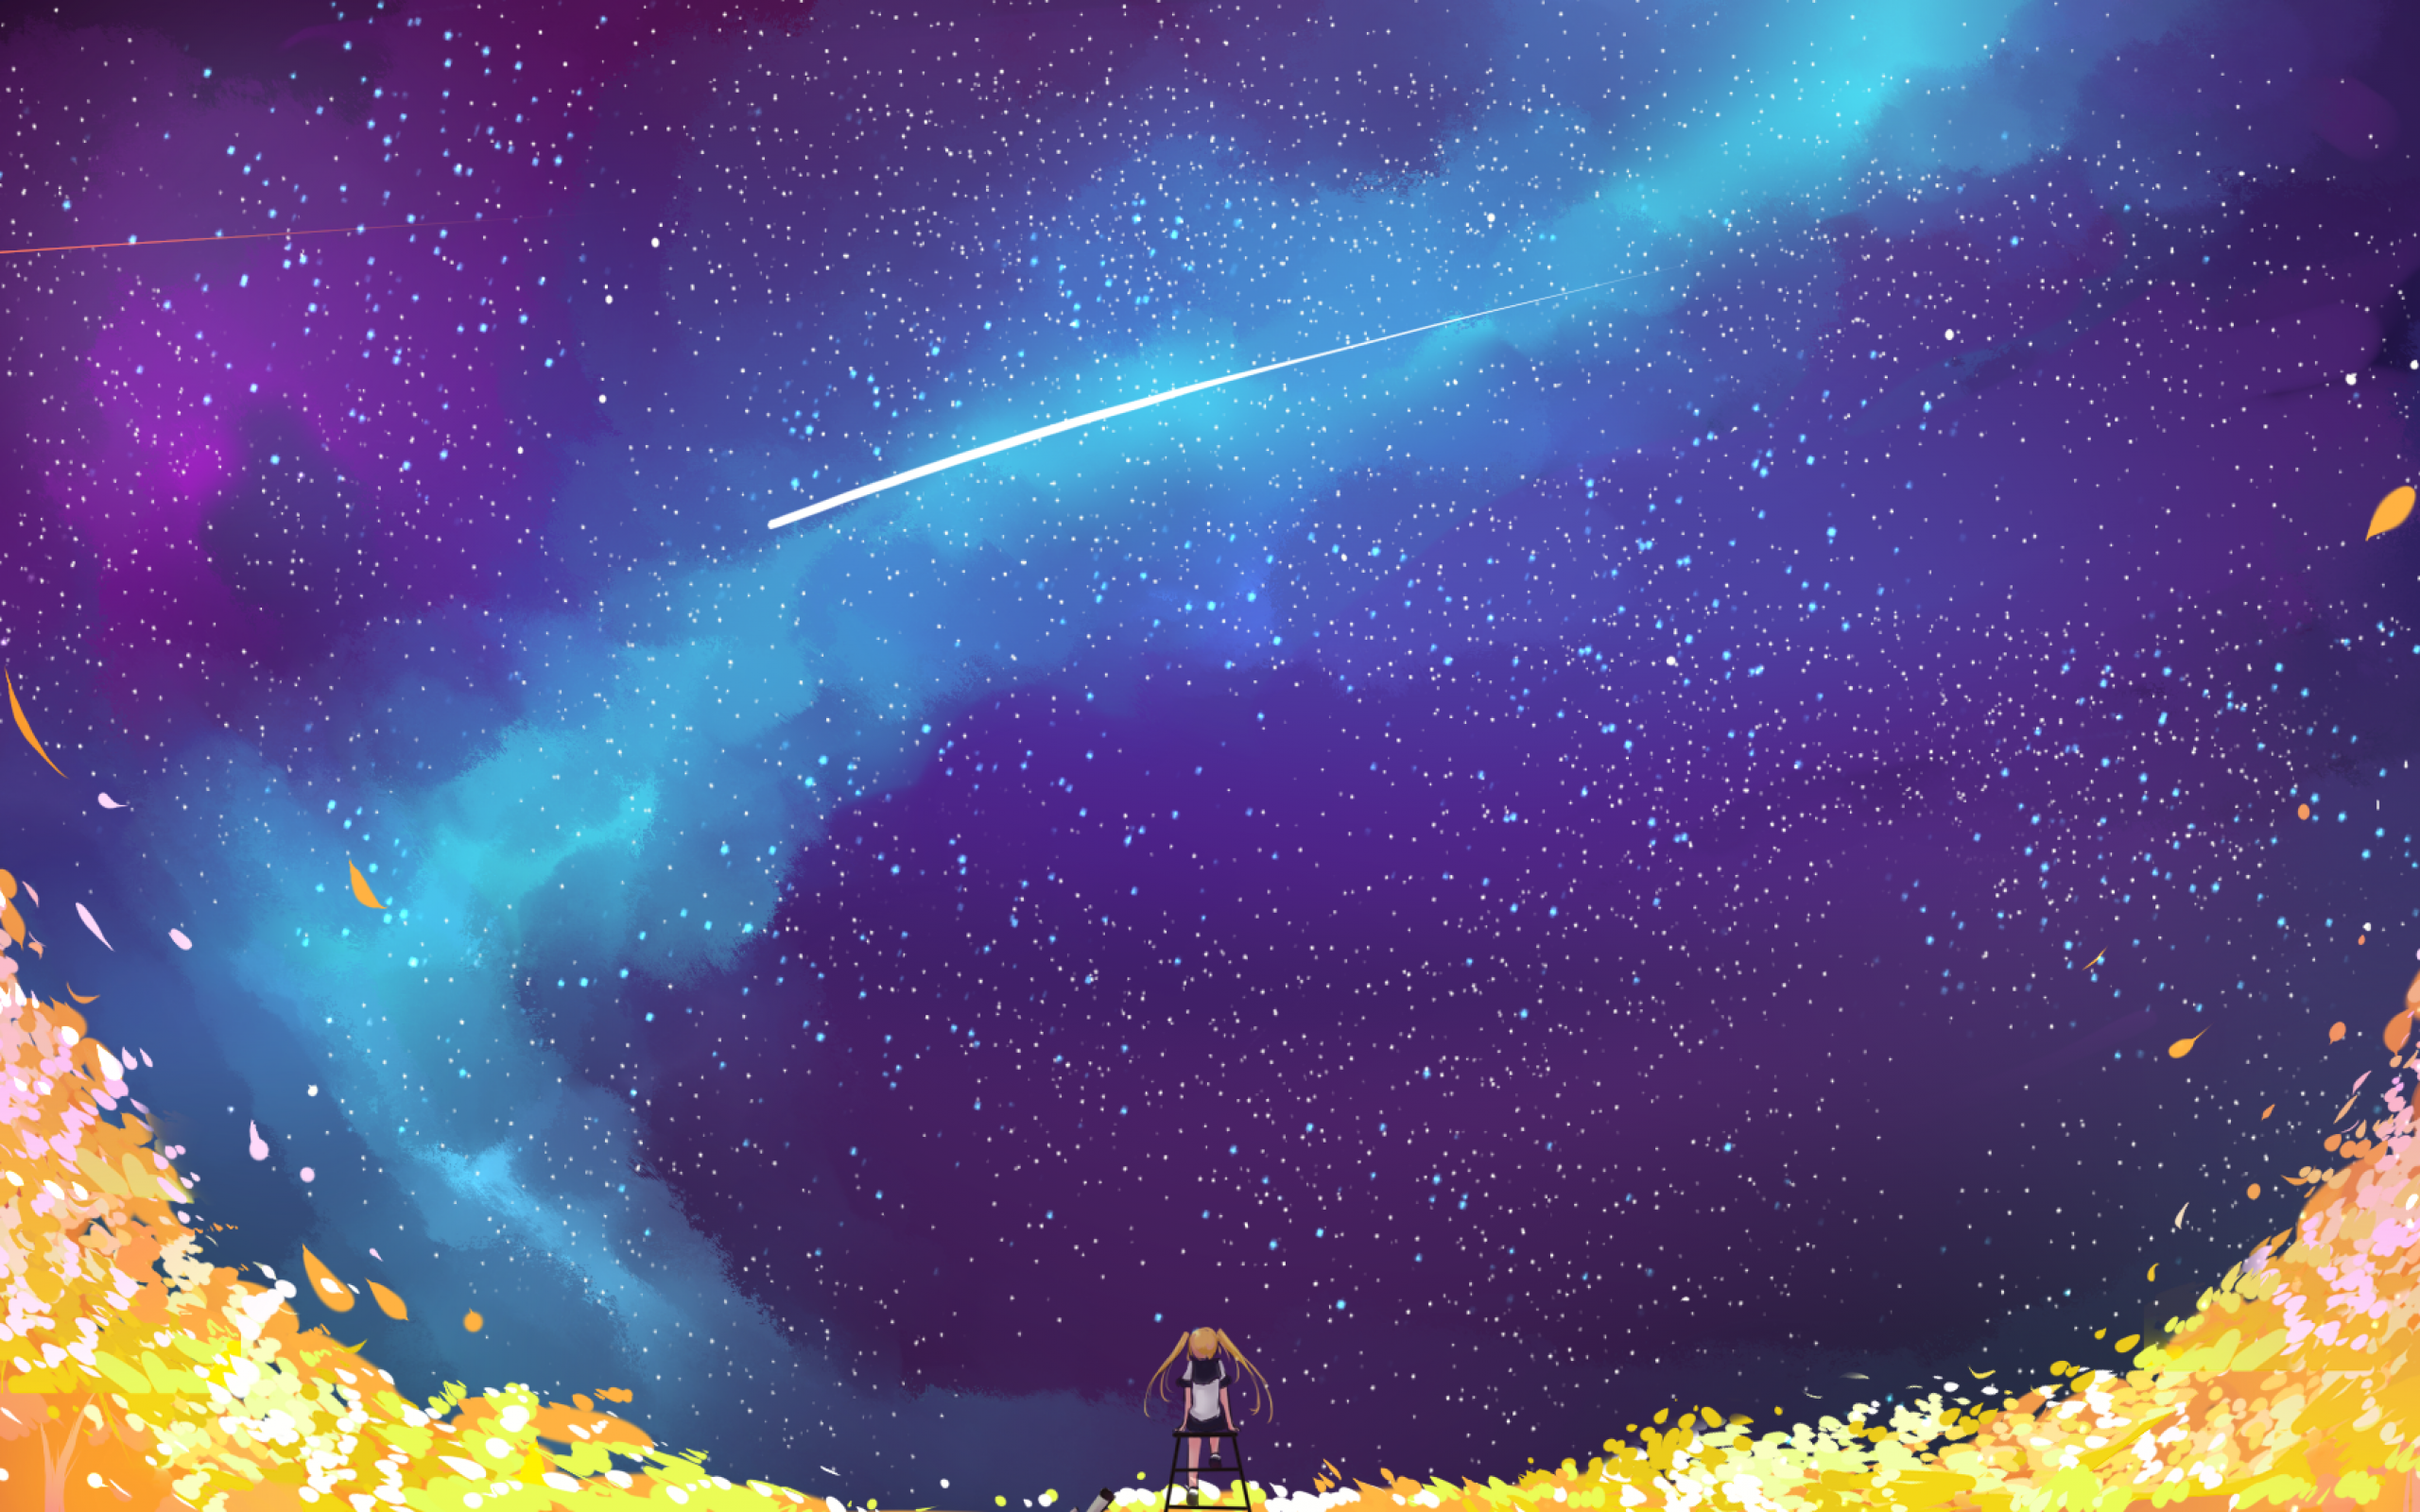 Download 2560x1600 Anime Girl, Space, Stars, Galaxy, Falling Stars, Petals Wallpaper for MacBook Pro 13 inch